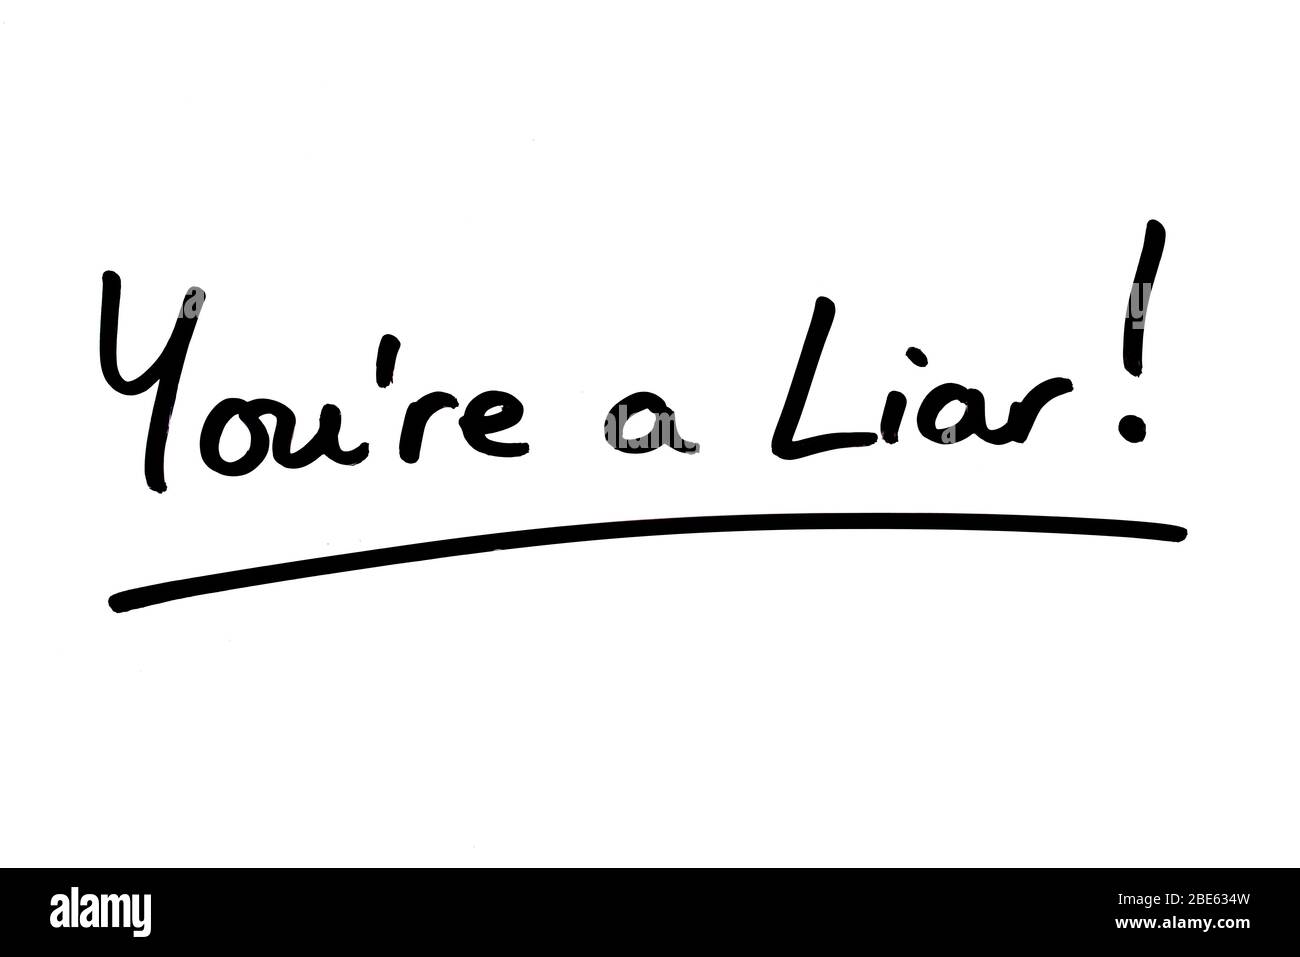 Youre a Liar! handwritten on a white background. Stock Photo